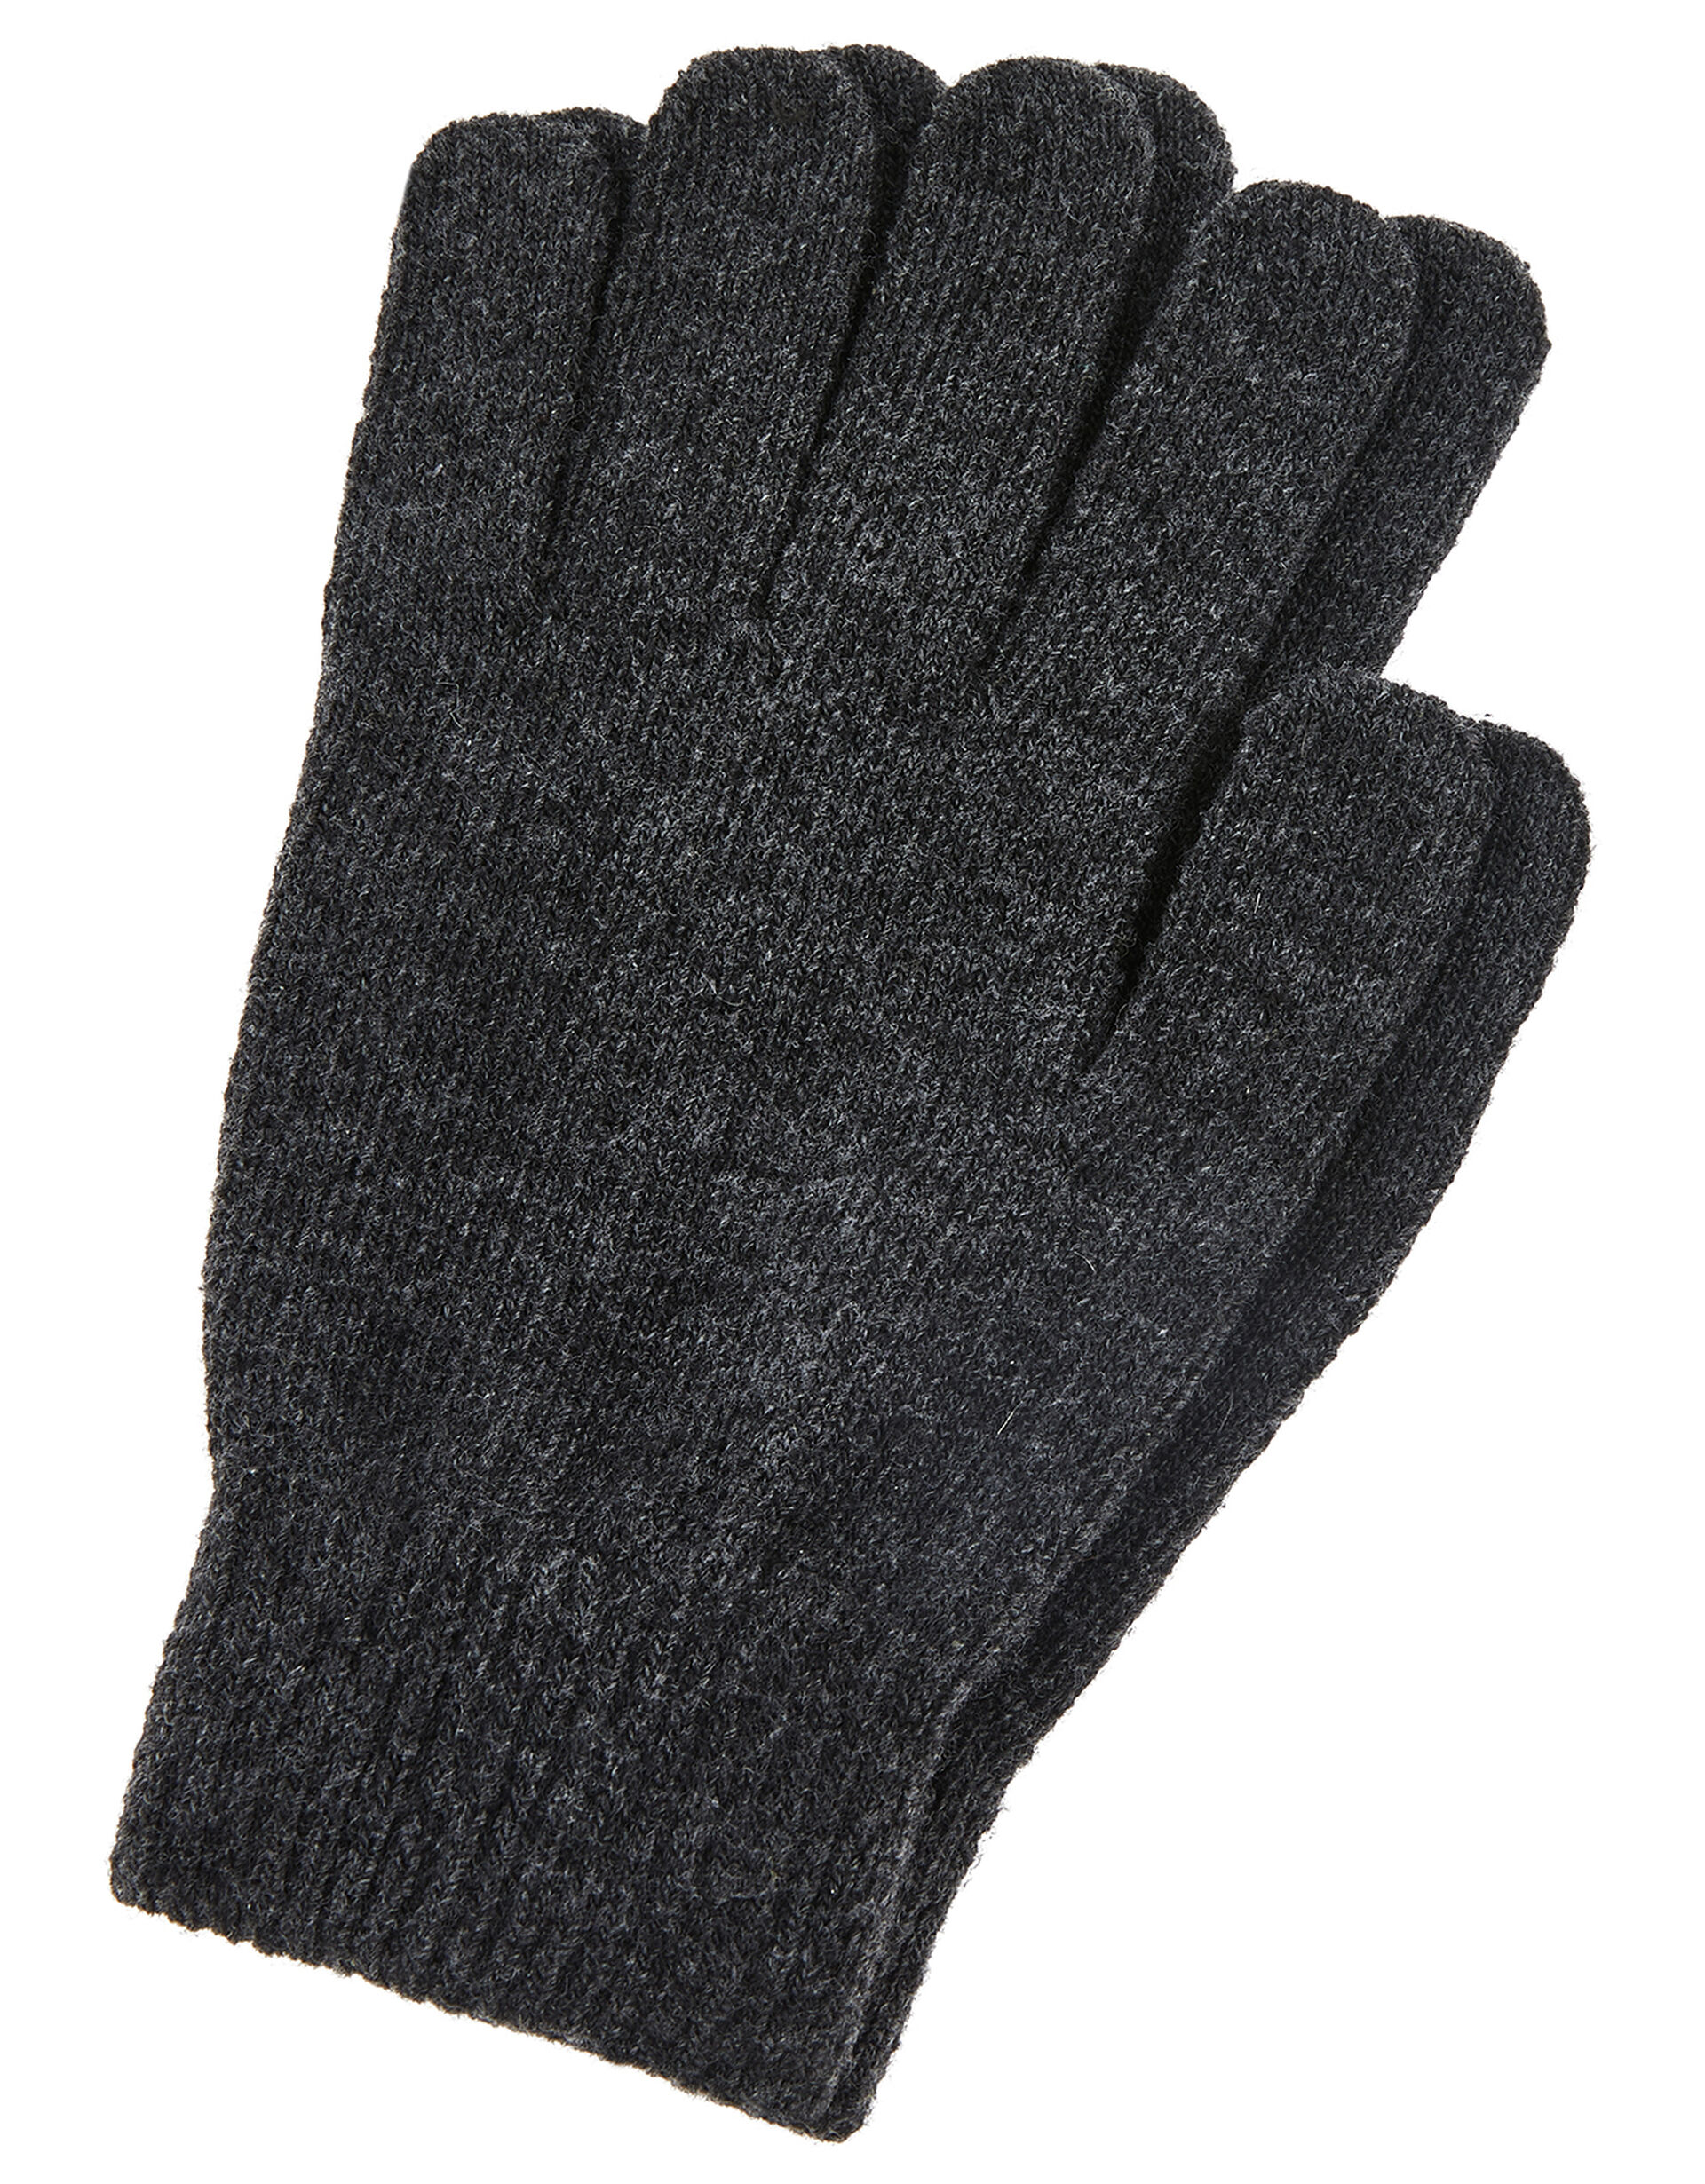 Super-Stretch Gloves with Recycled Polyester, Grey (GREY), large